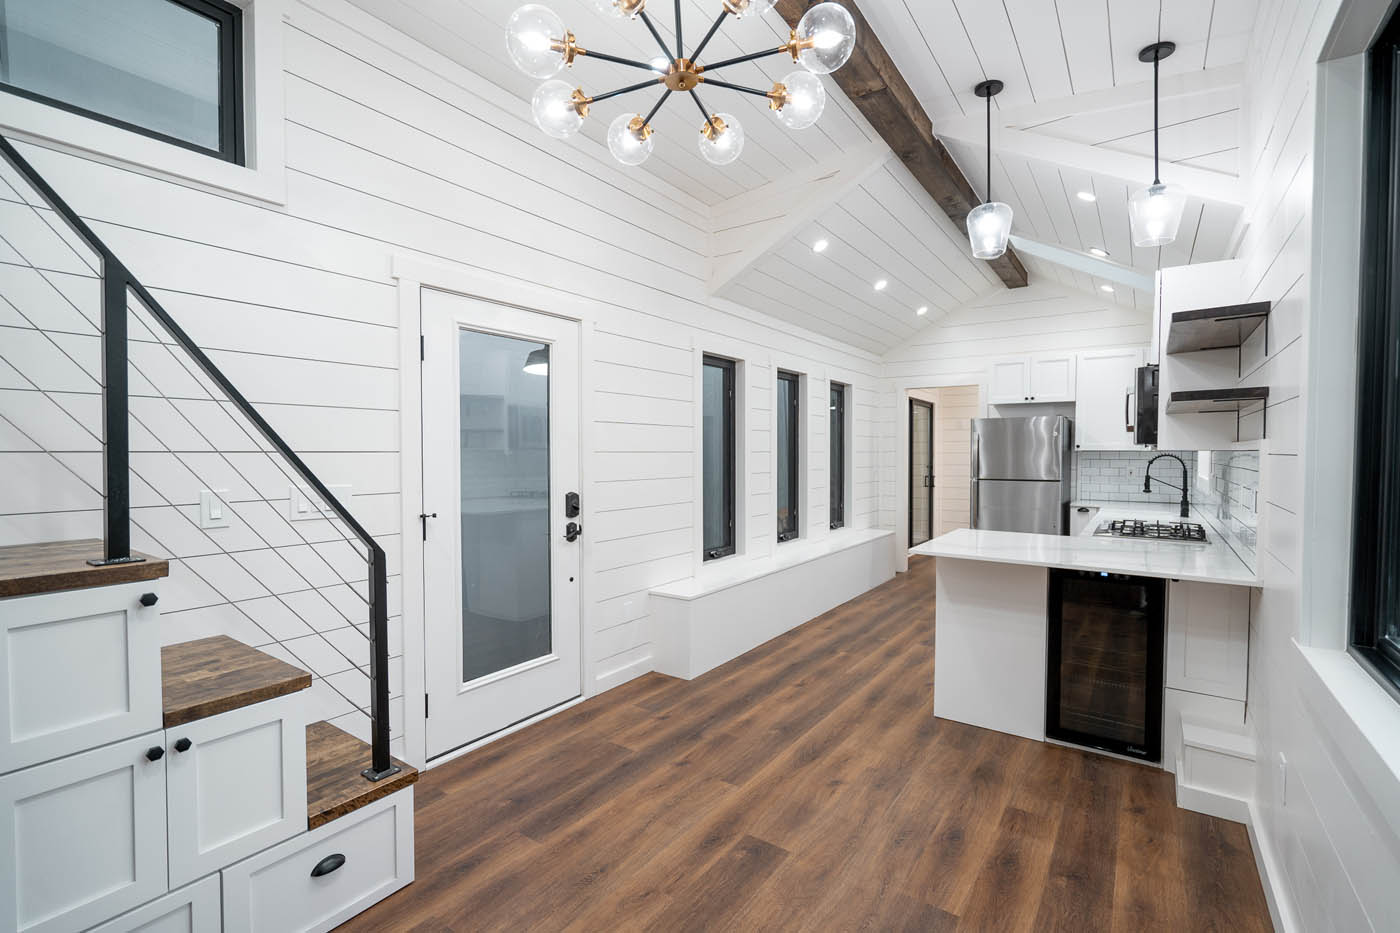 A modern home with dark floors and white kitchen cabinets, provided by one of the best Sacramento tiny house companies.